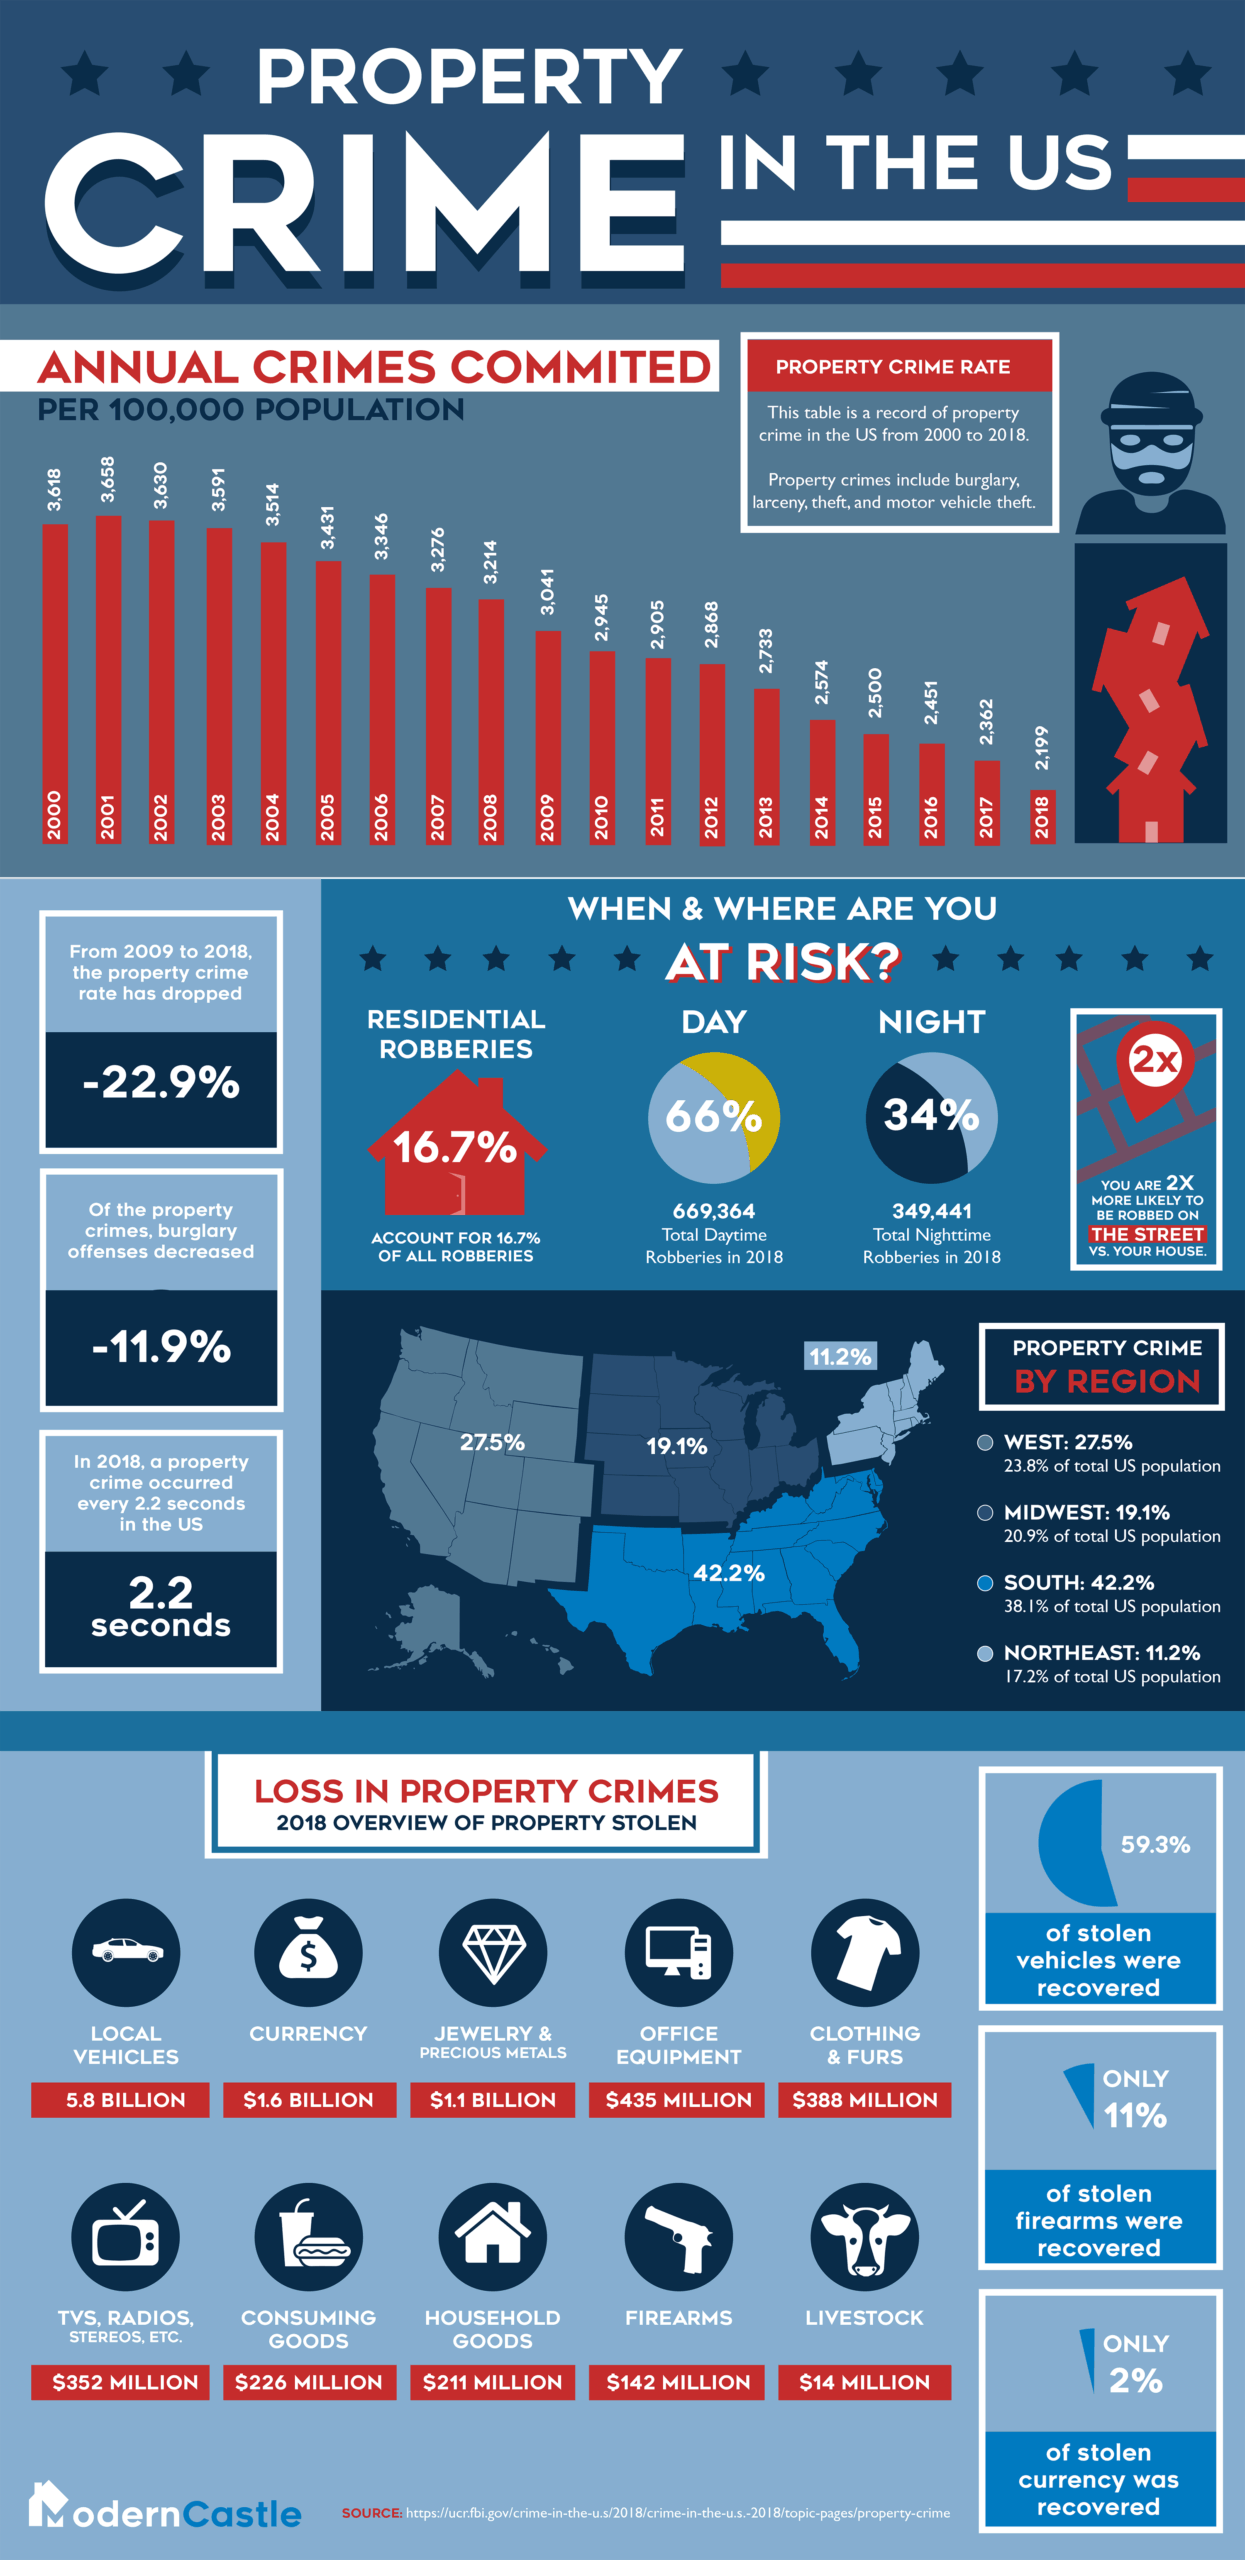 property crime in the US infographic